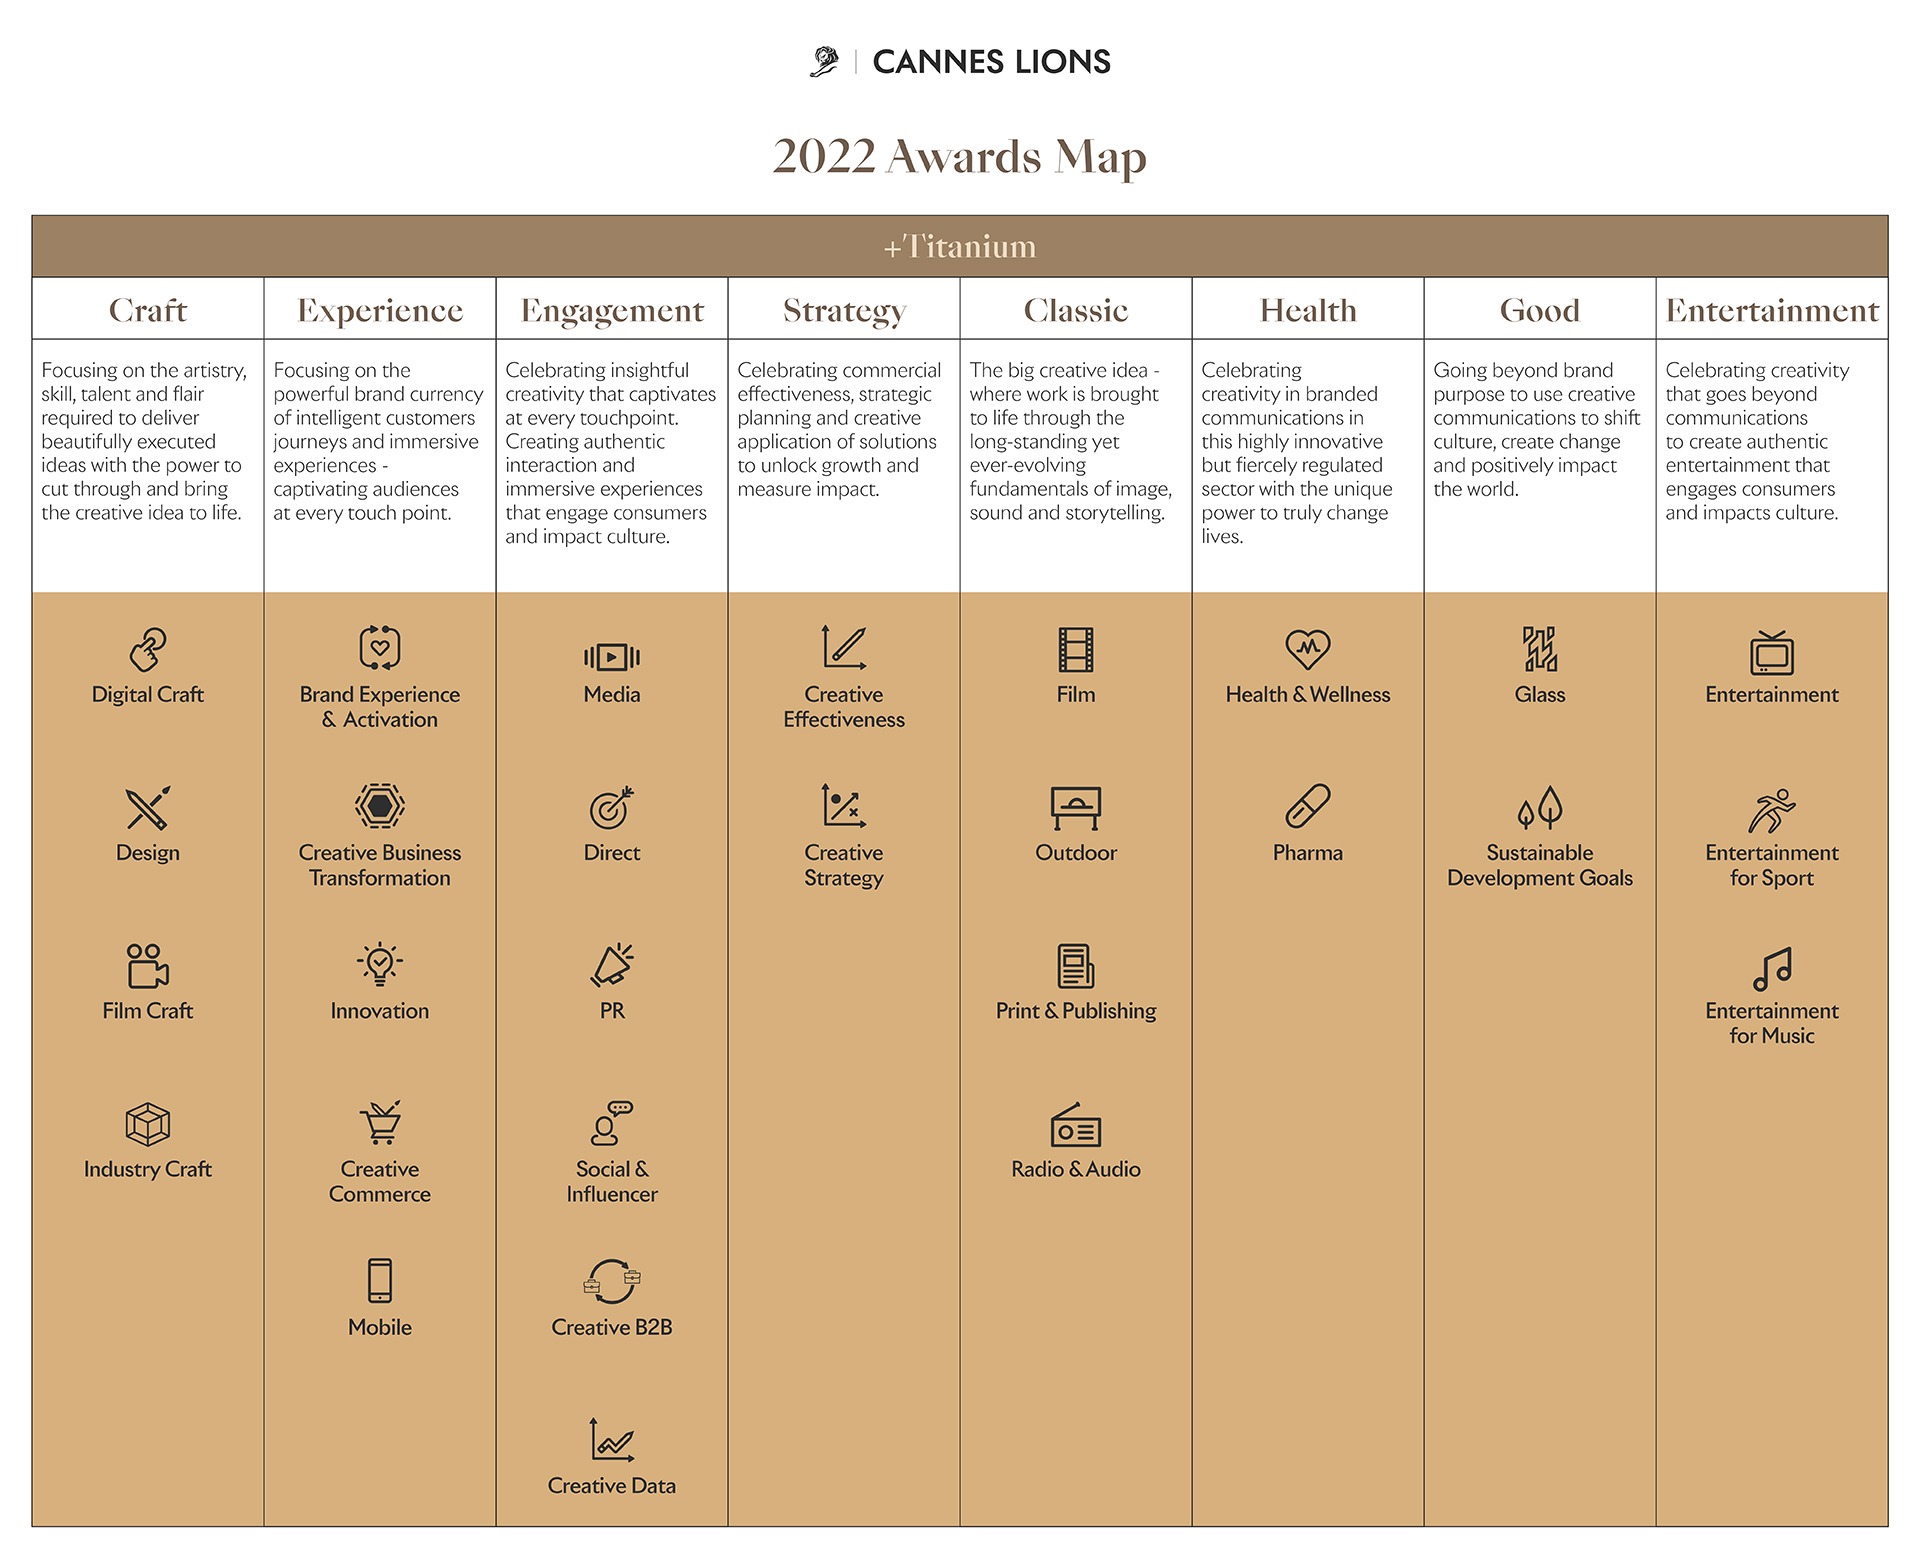 cannes-lions-2022-awards-map-categories